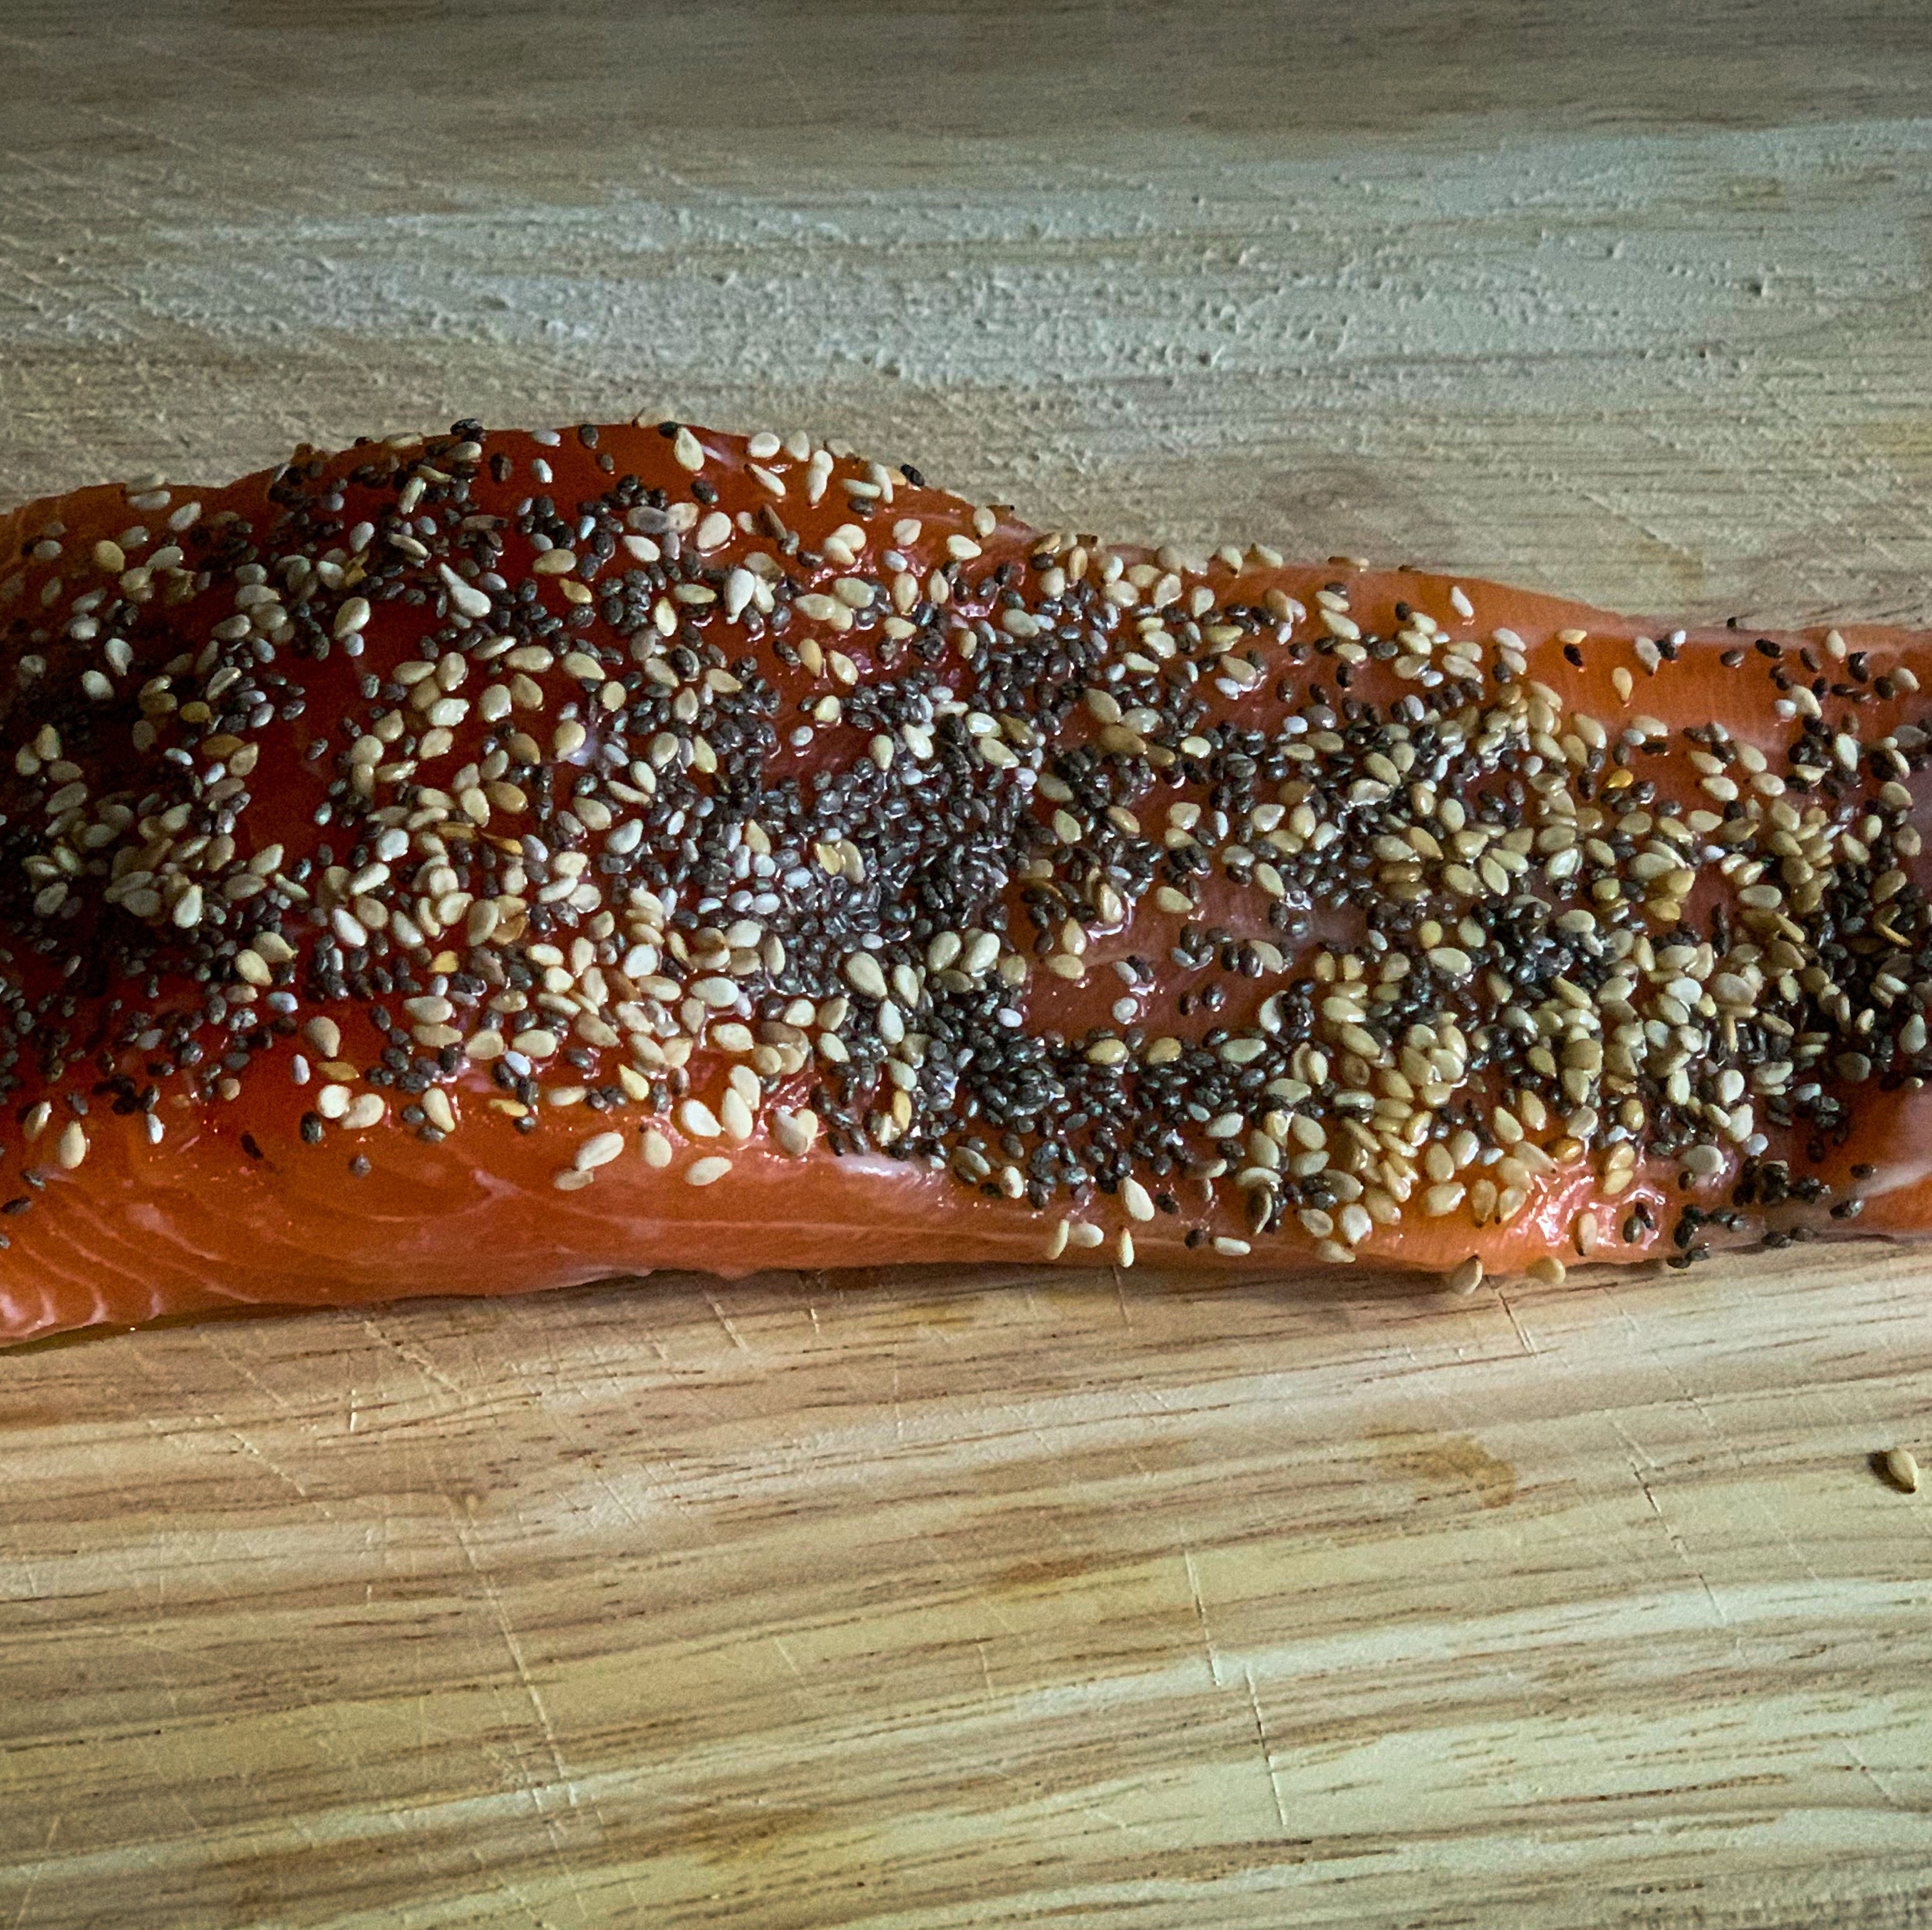 In a pan with a bit of olive oil, when hot but not smoking, put the salmon and cook it about 1 min per side.